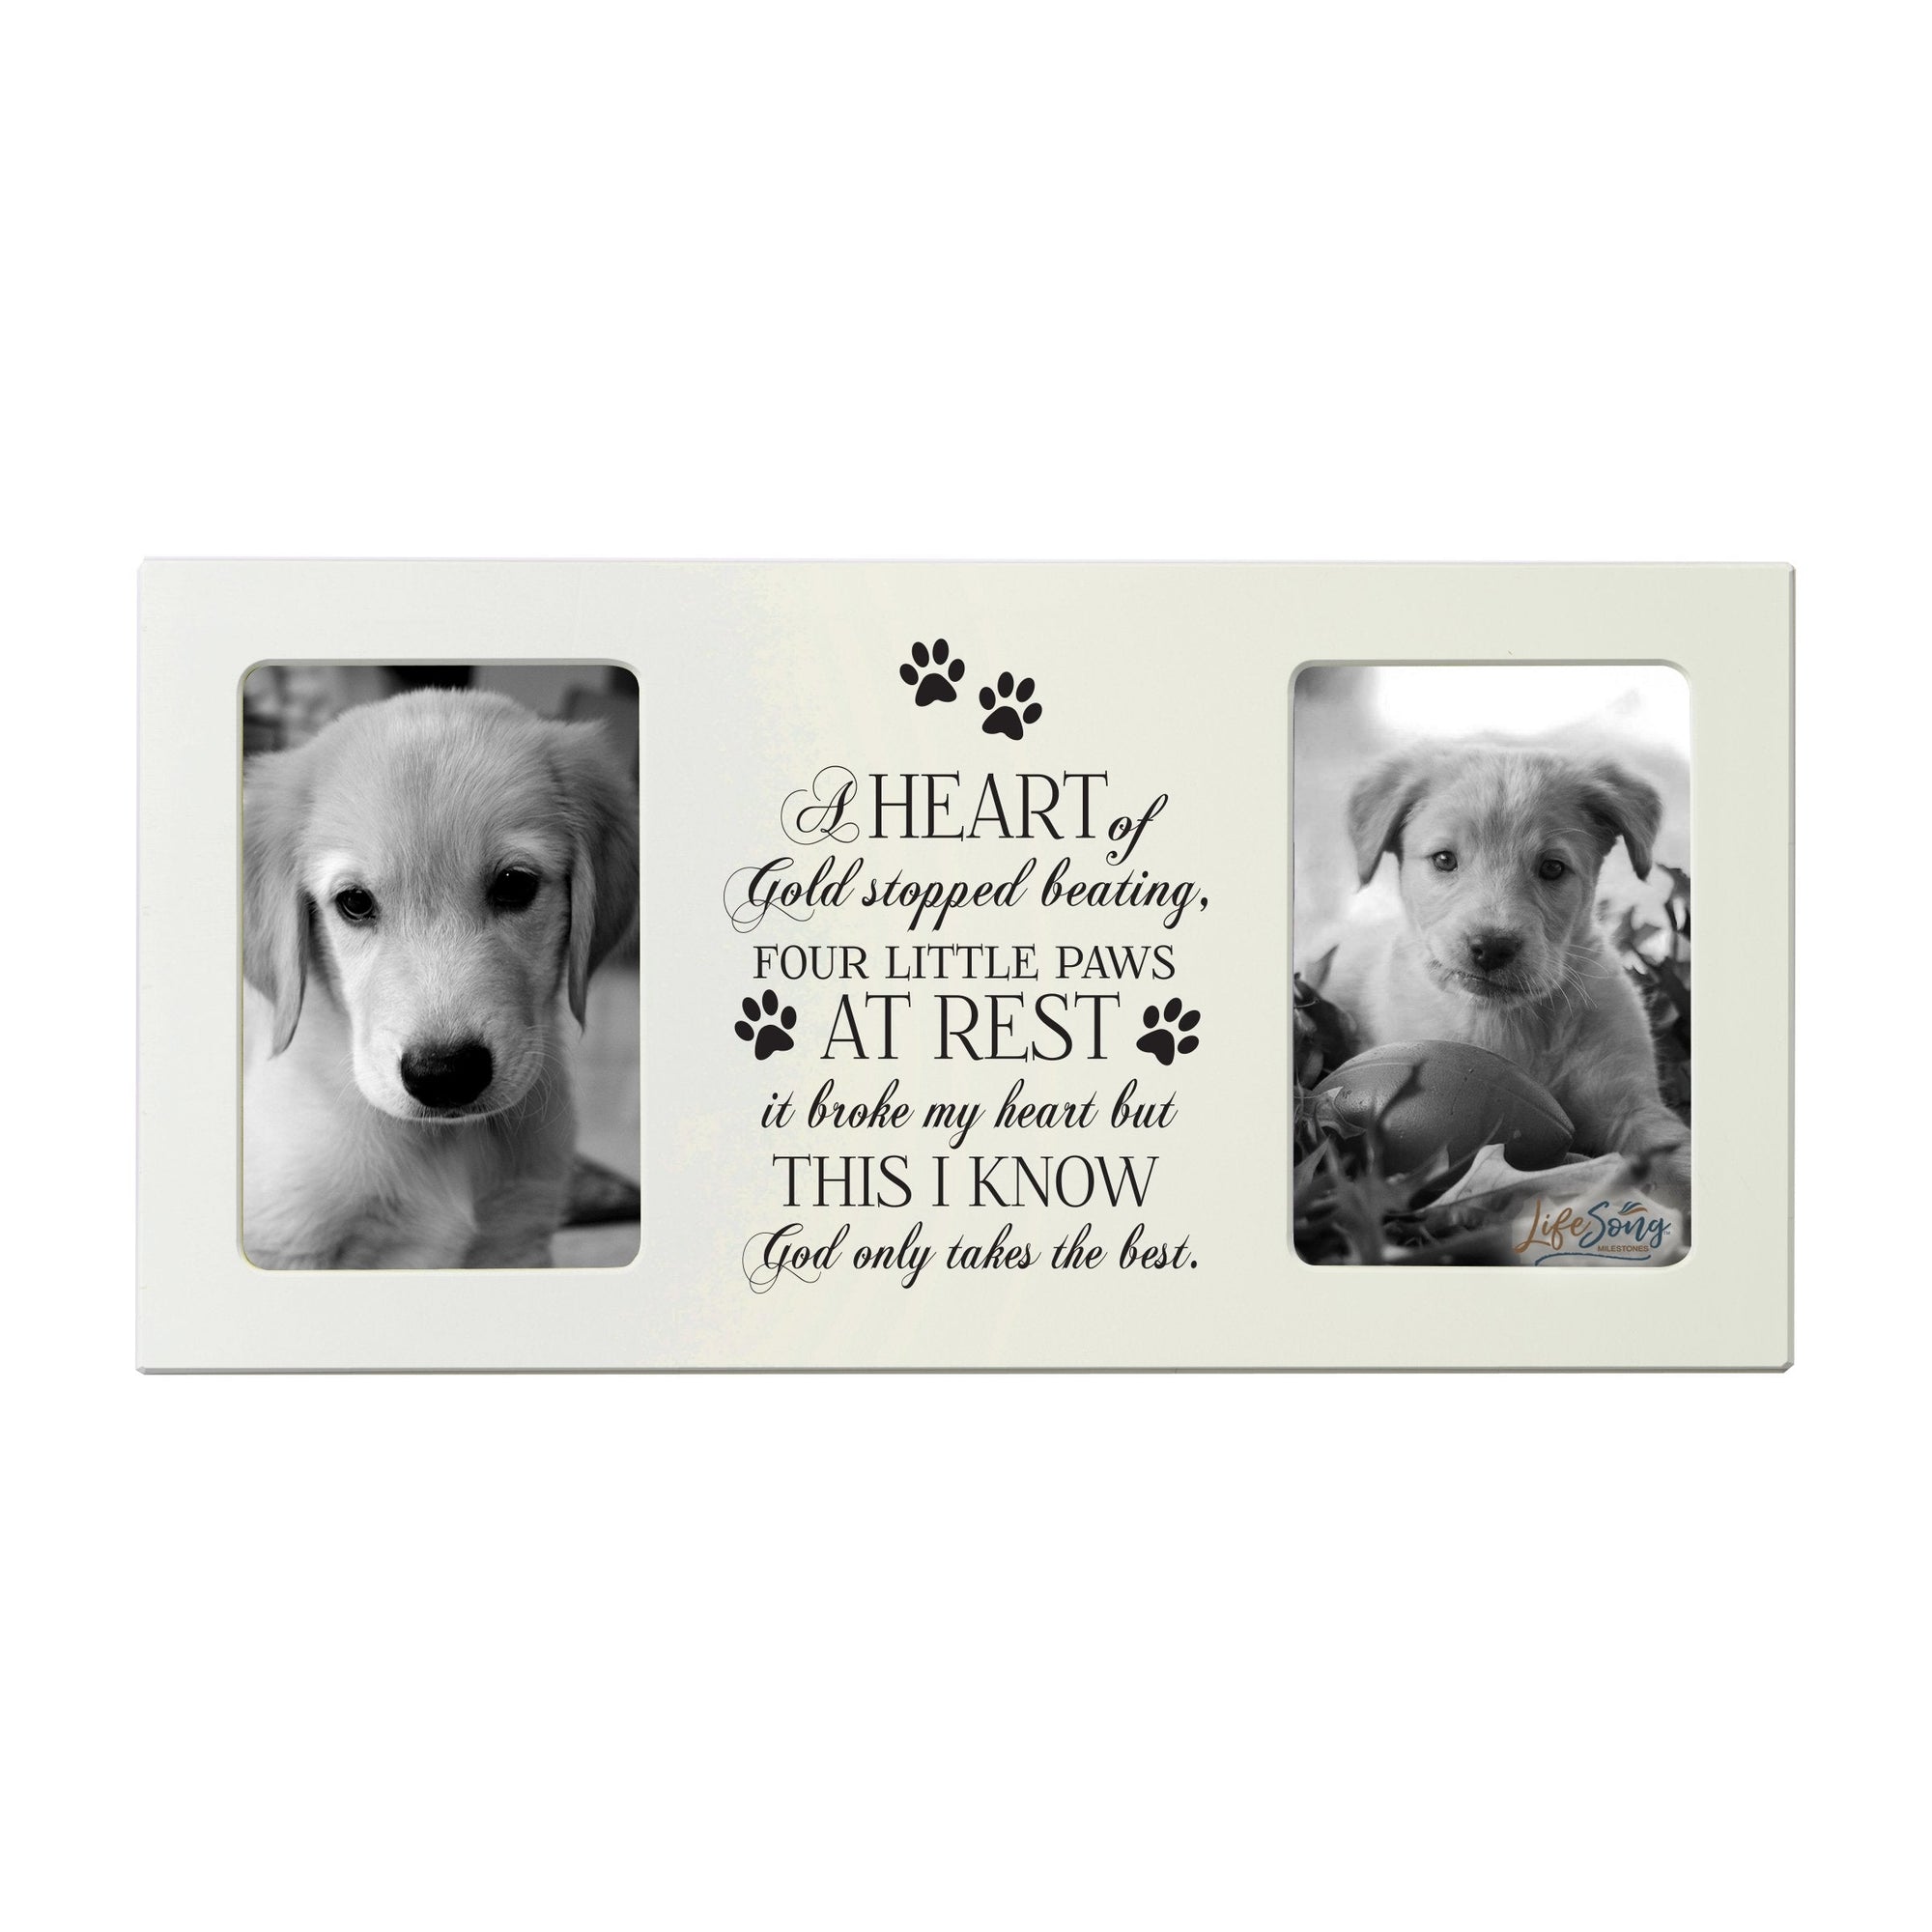 Ivory Pet Memorial Double 4x6 Picture Frame with phrase "Heart of Gold"